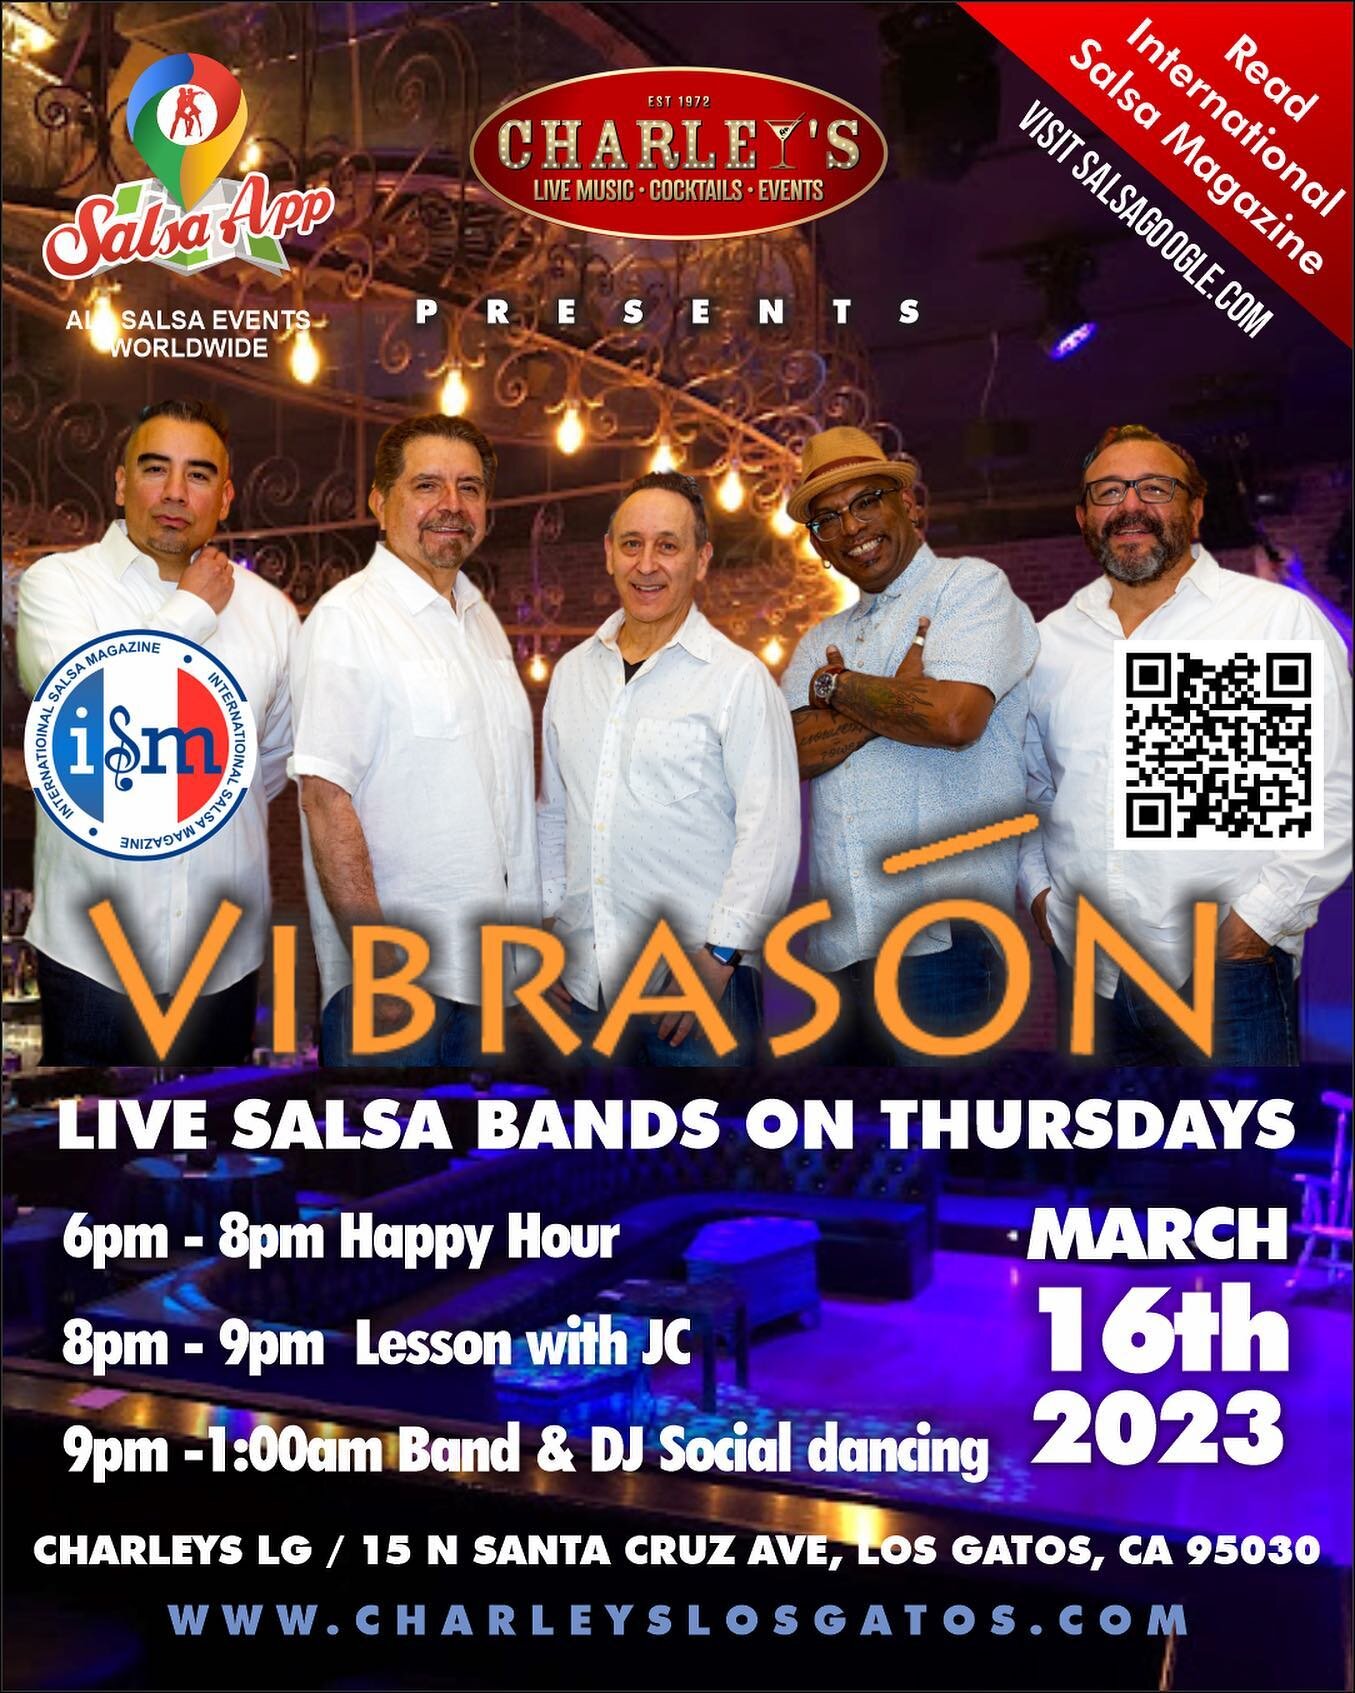 Join Conjunto VibraSON live Thurs 16 March at Charley&rsquo;s LG! Salsa lesson by JC before the show too!